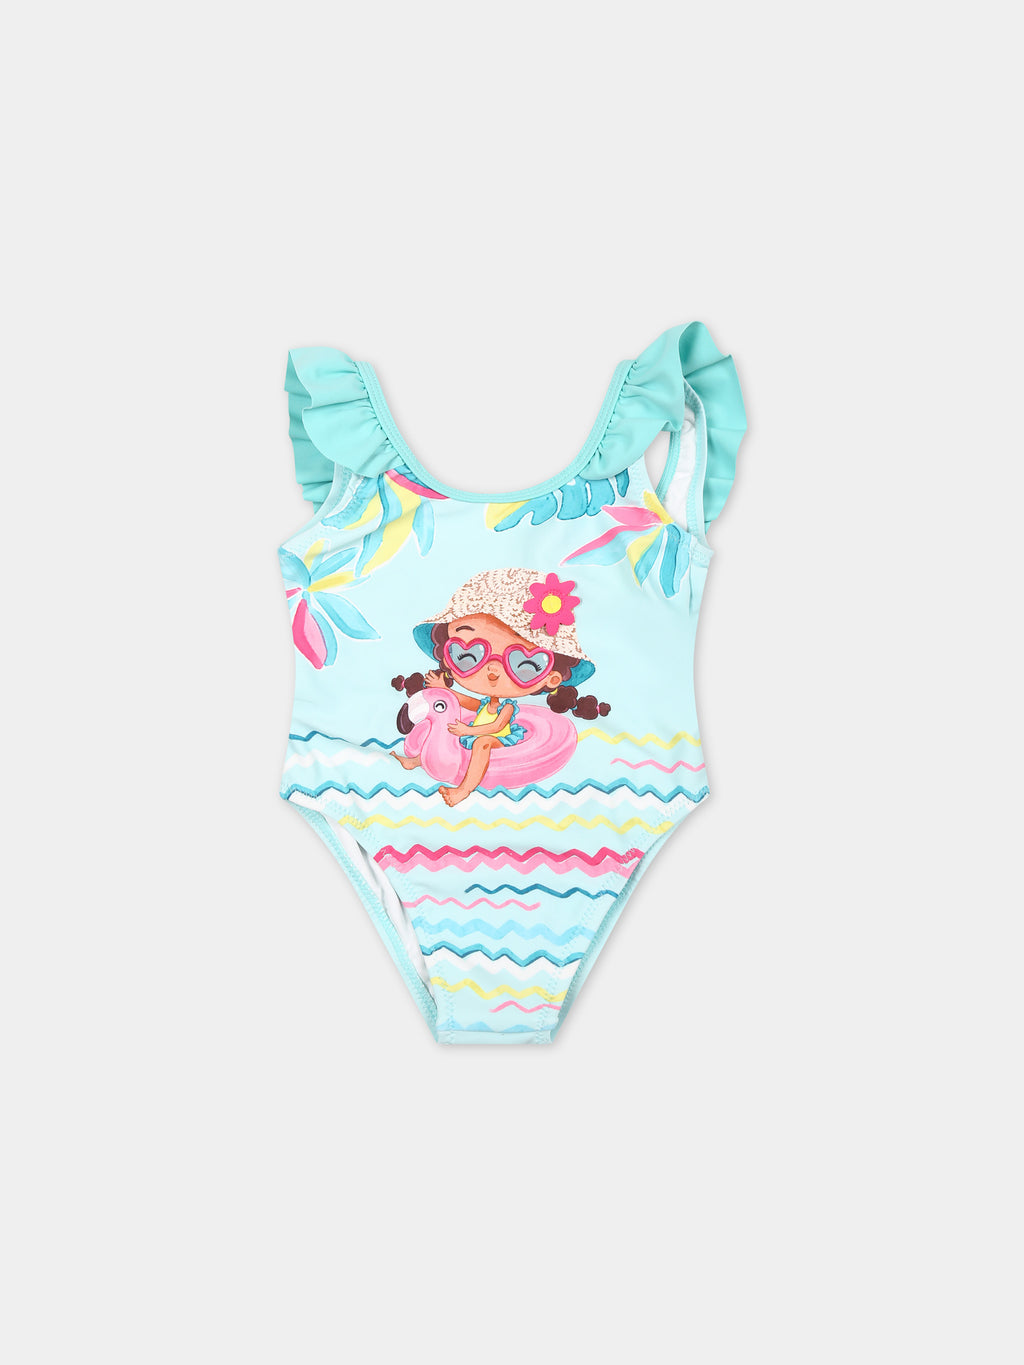 Green swimsuit for baby girl with flamingo and flower